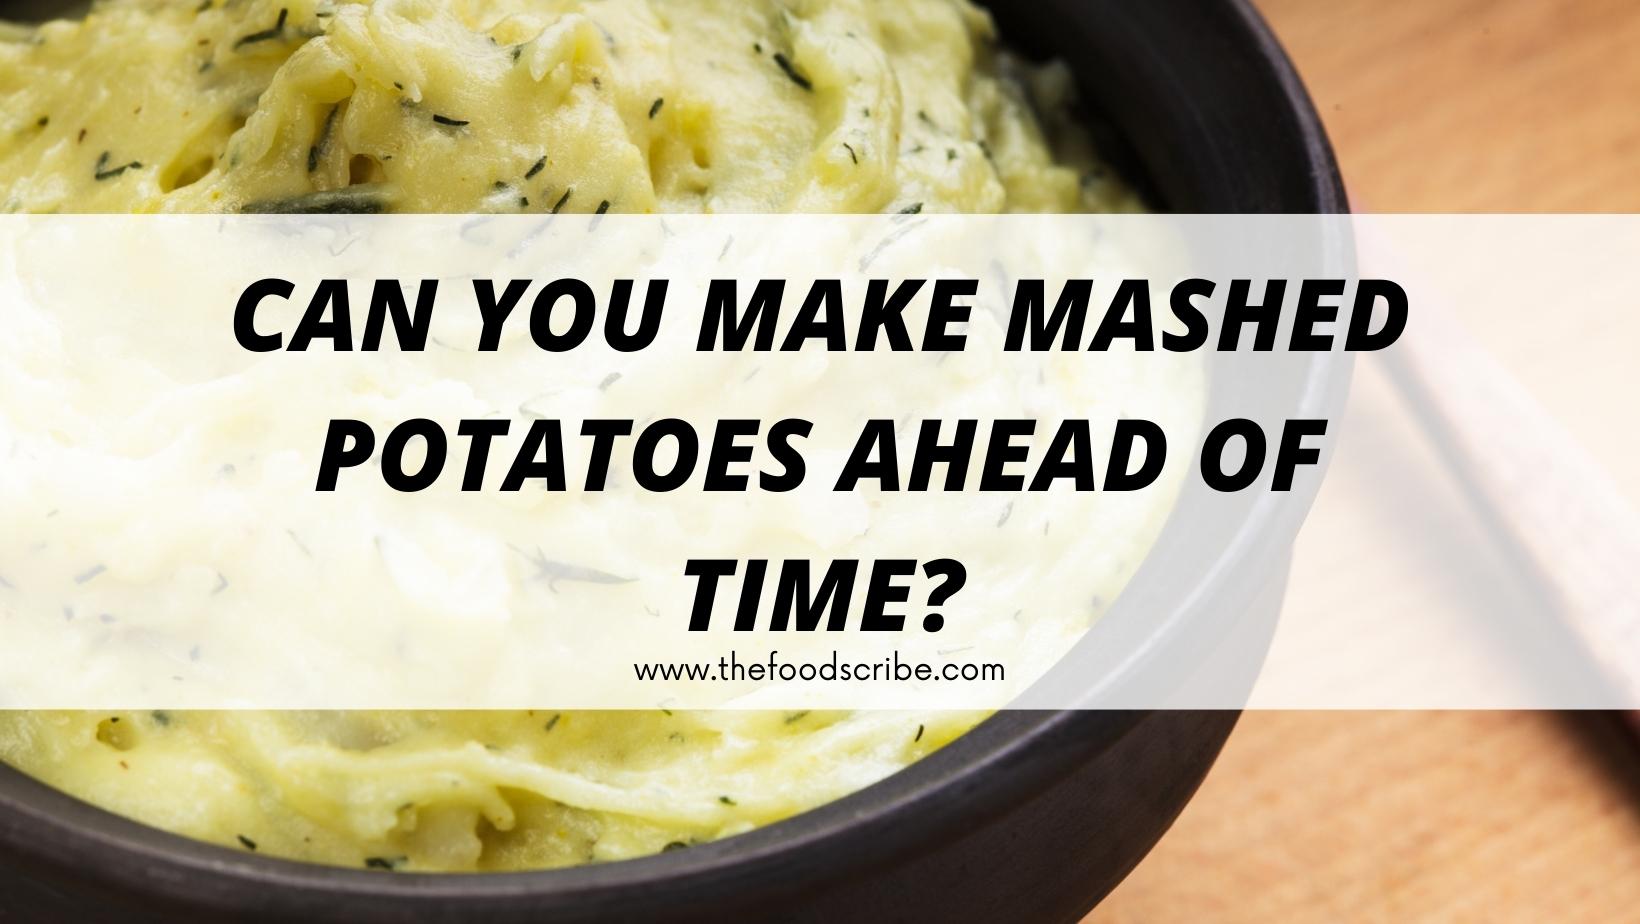 Can You Make Mashed Potatoes Ahead Of Time?